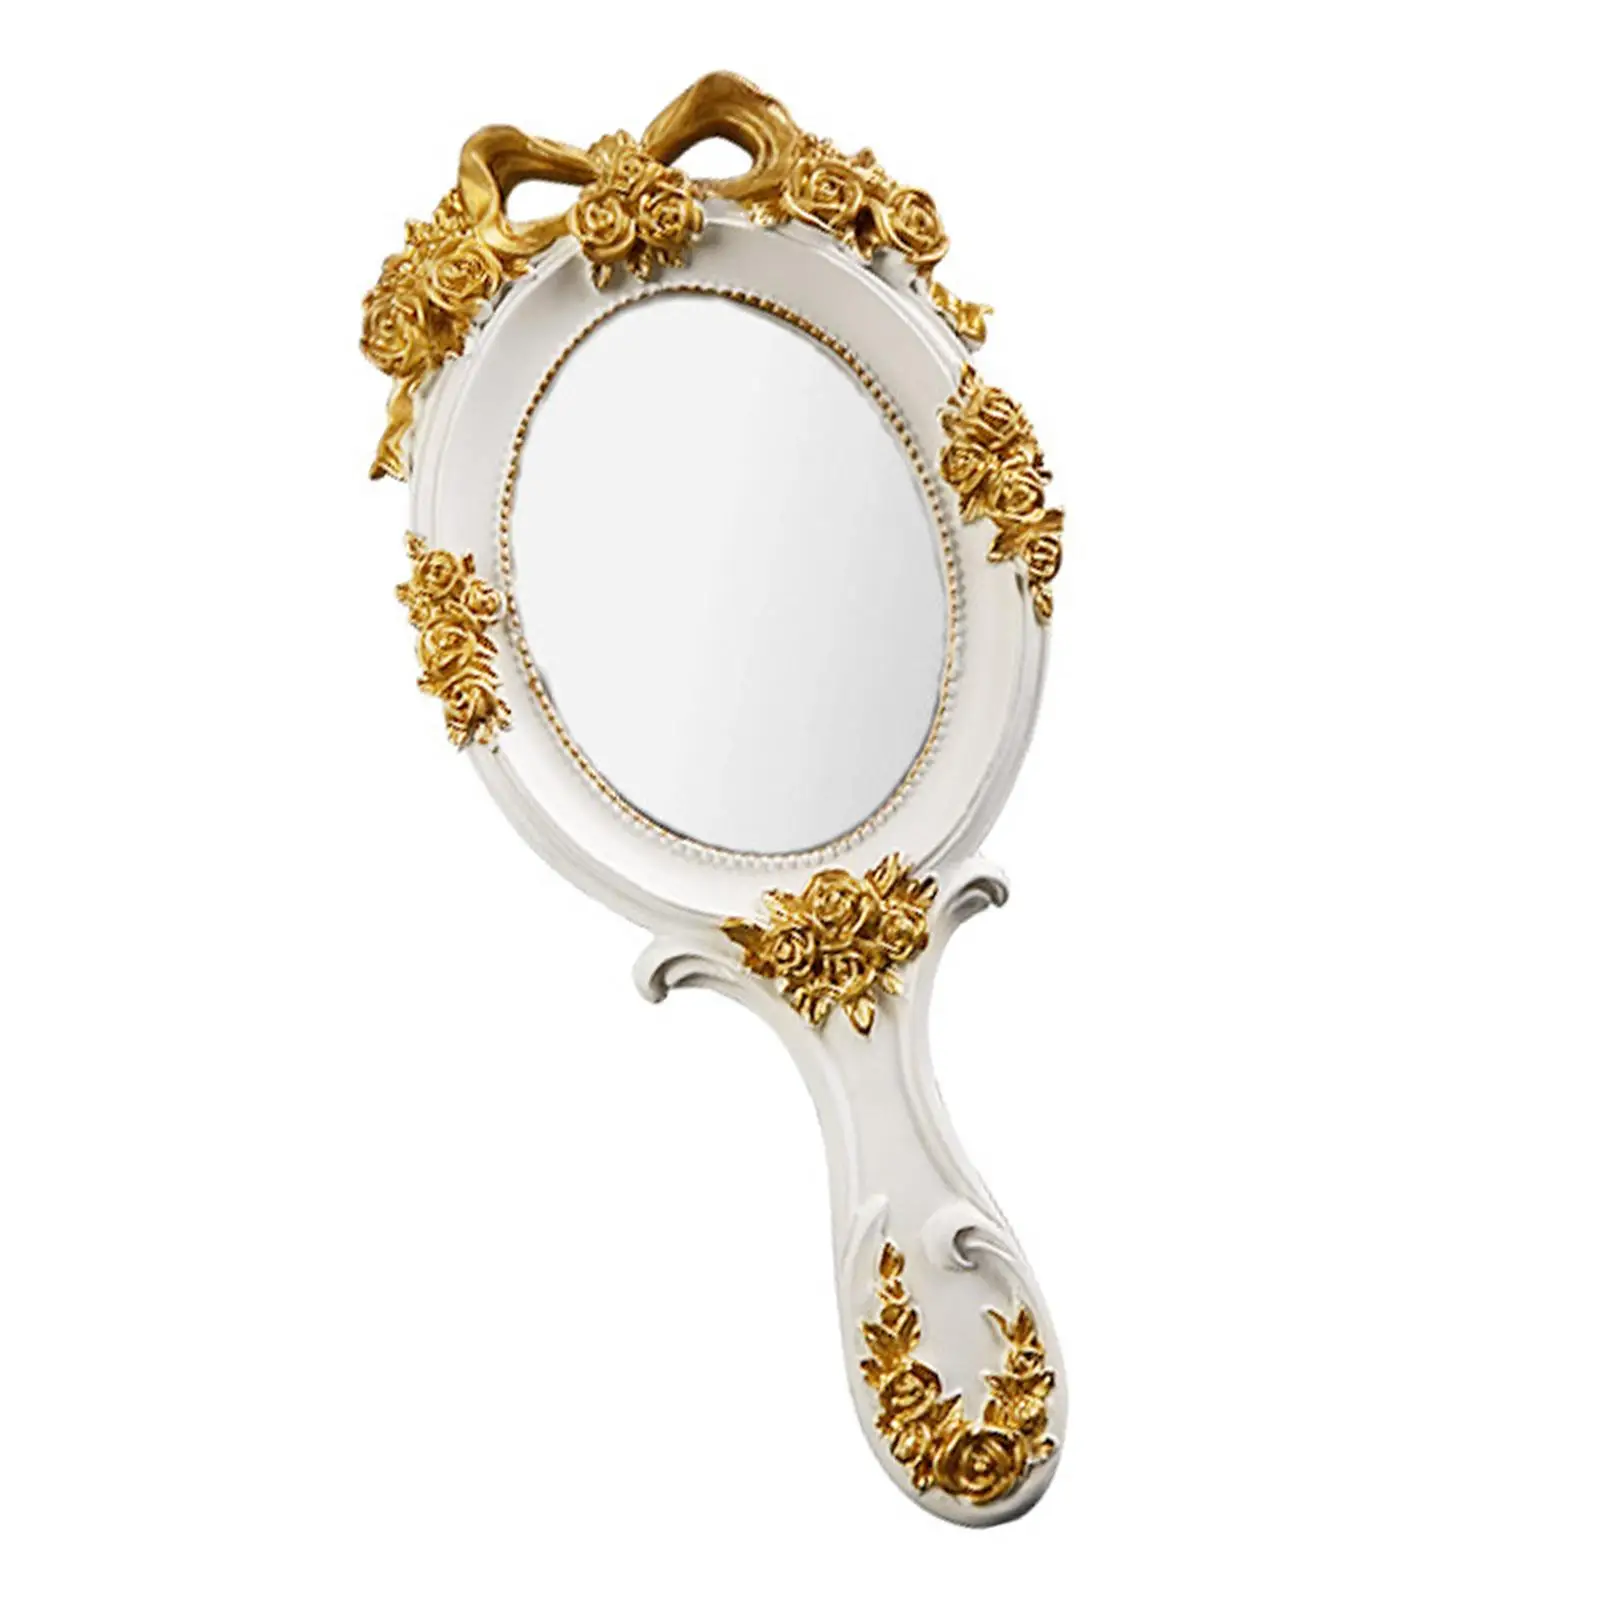 Hand Mirror with Handle Floral Decors Packet Mini Mirror Creative Decorative Mirror Handheld Mirror for Girl Beauty Salon